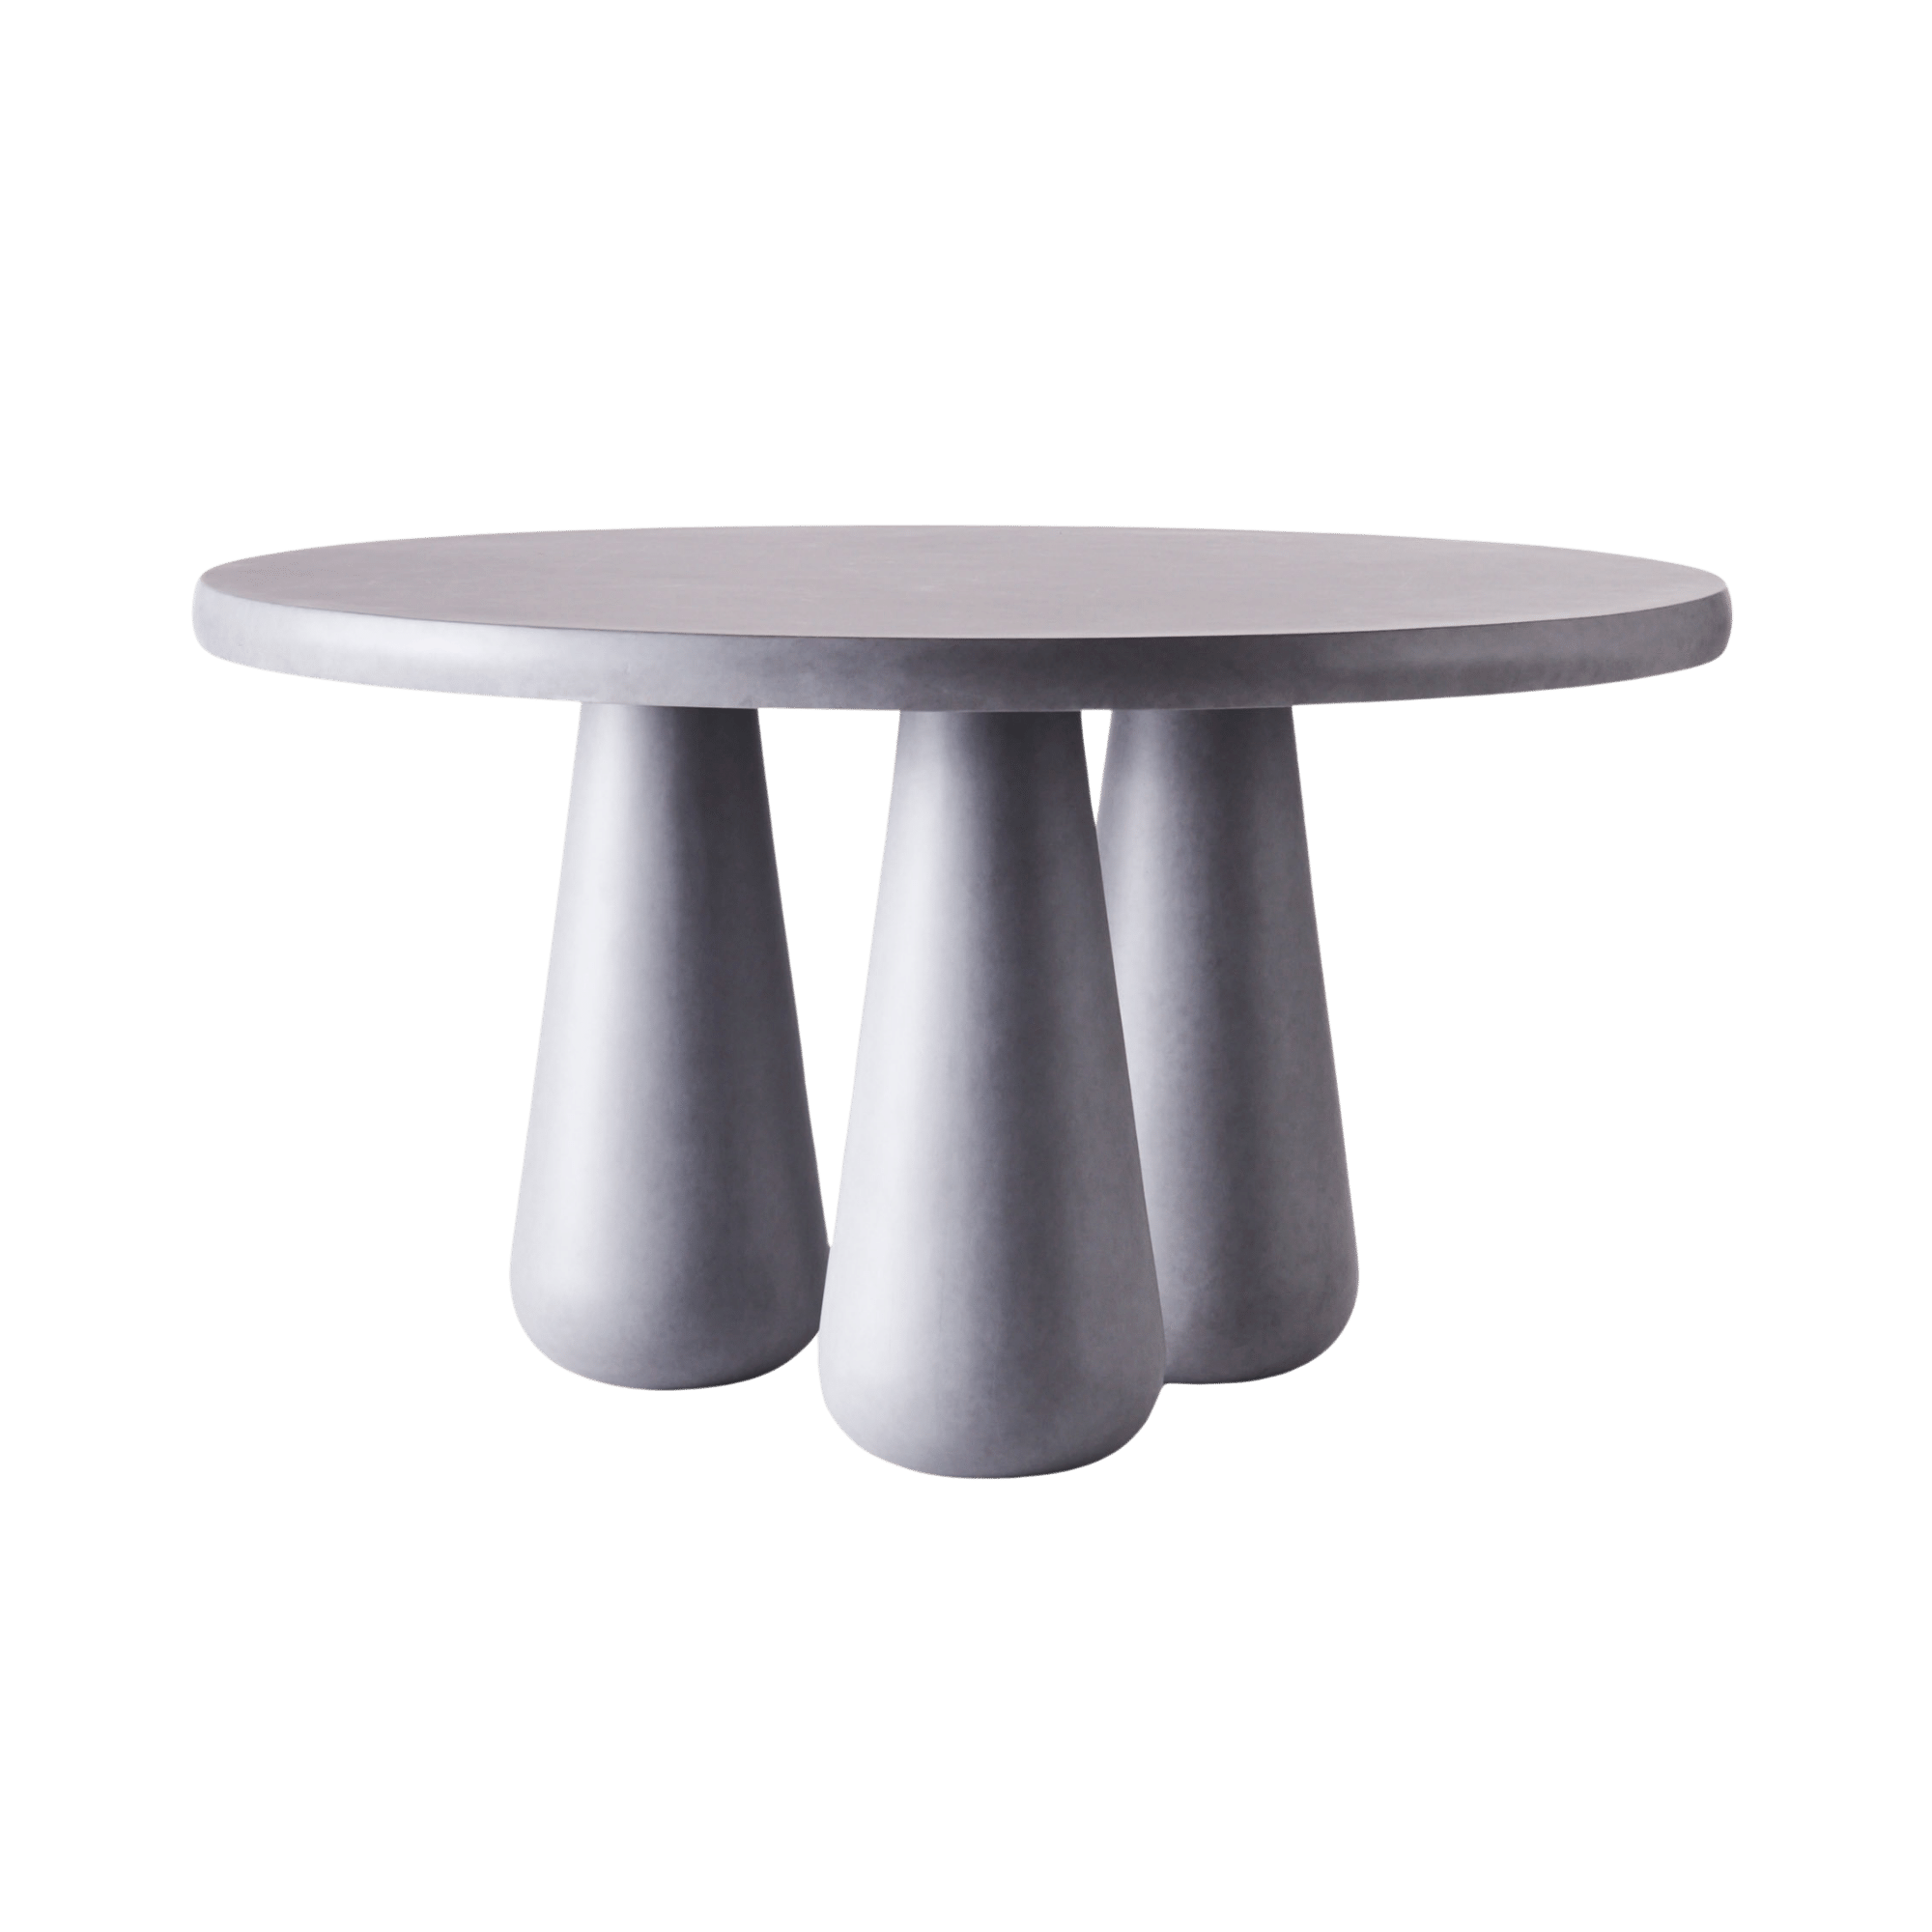 Round Dining Table Grey - THAT COOL LIVING